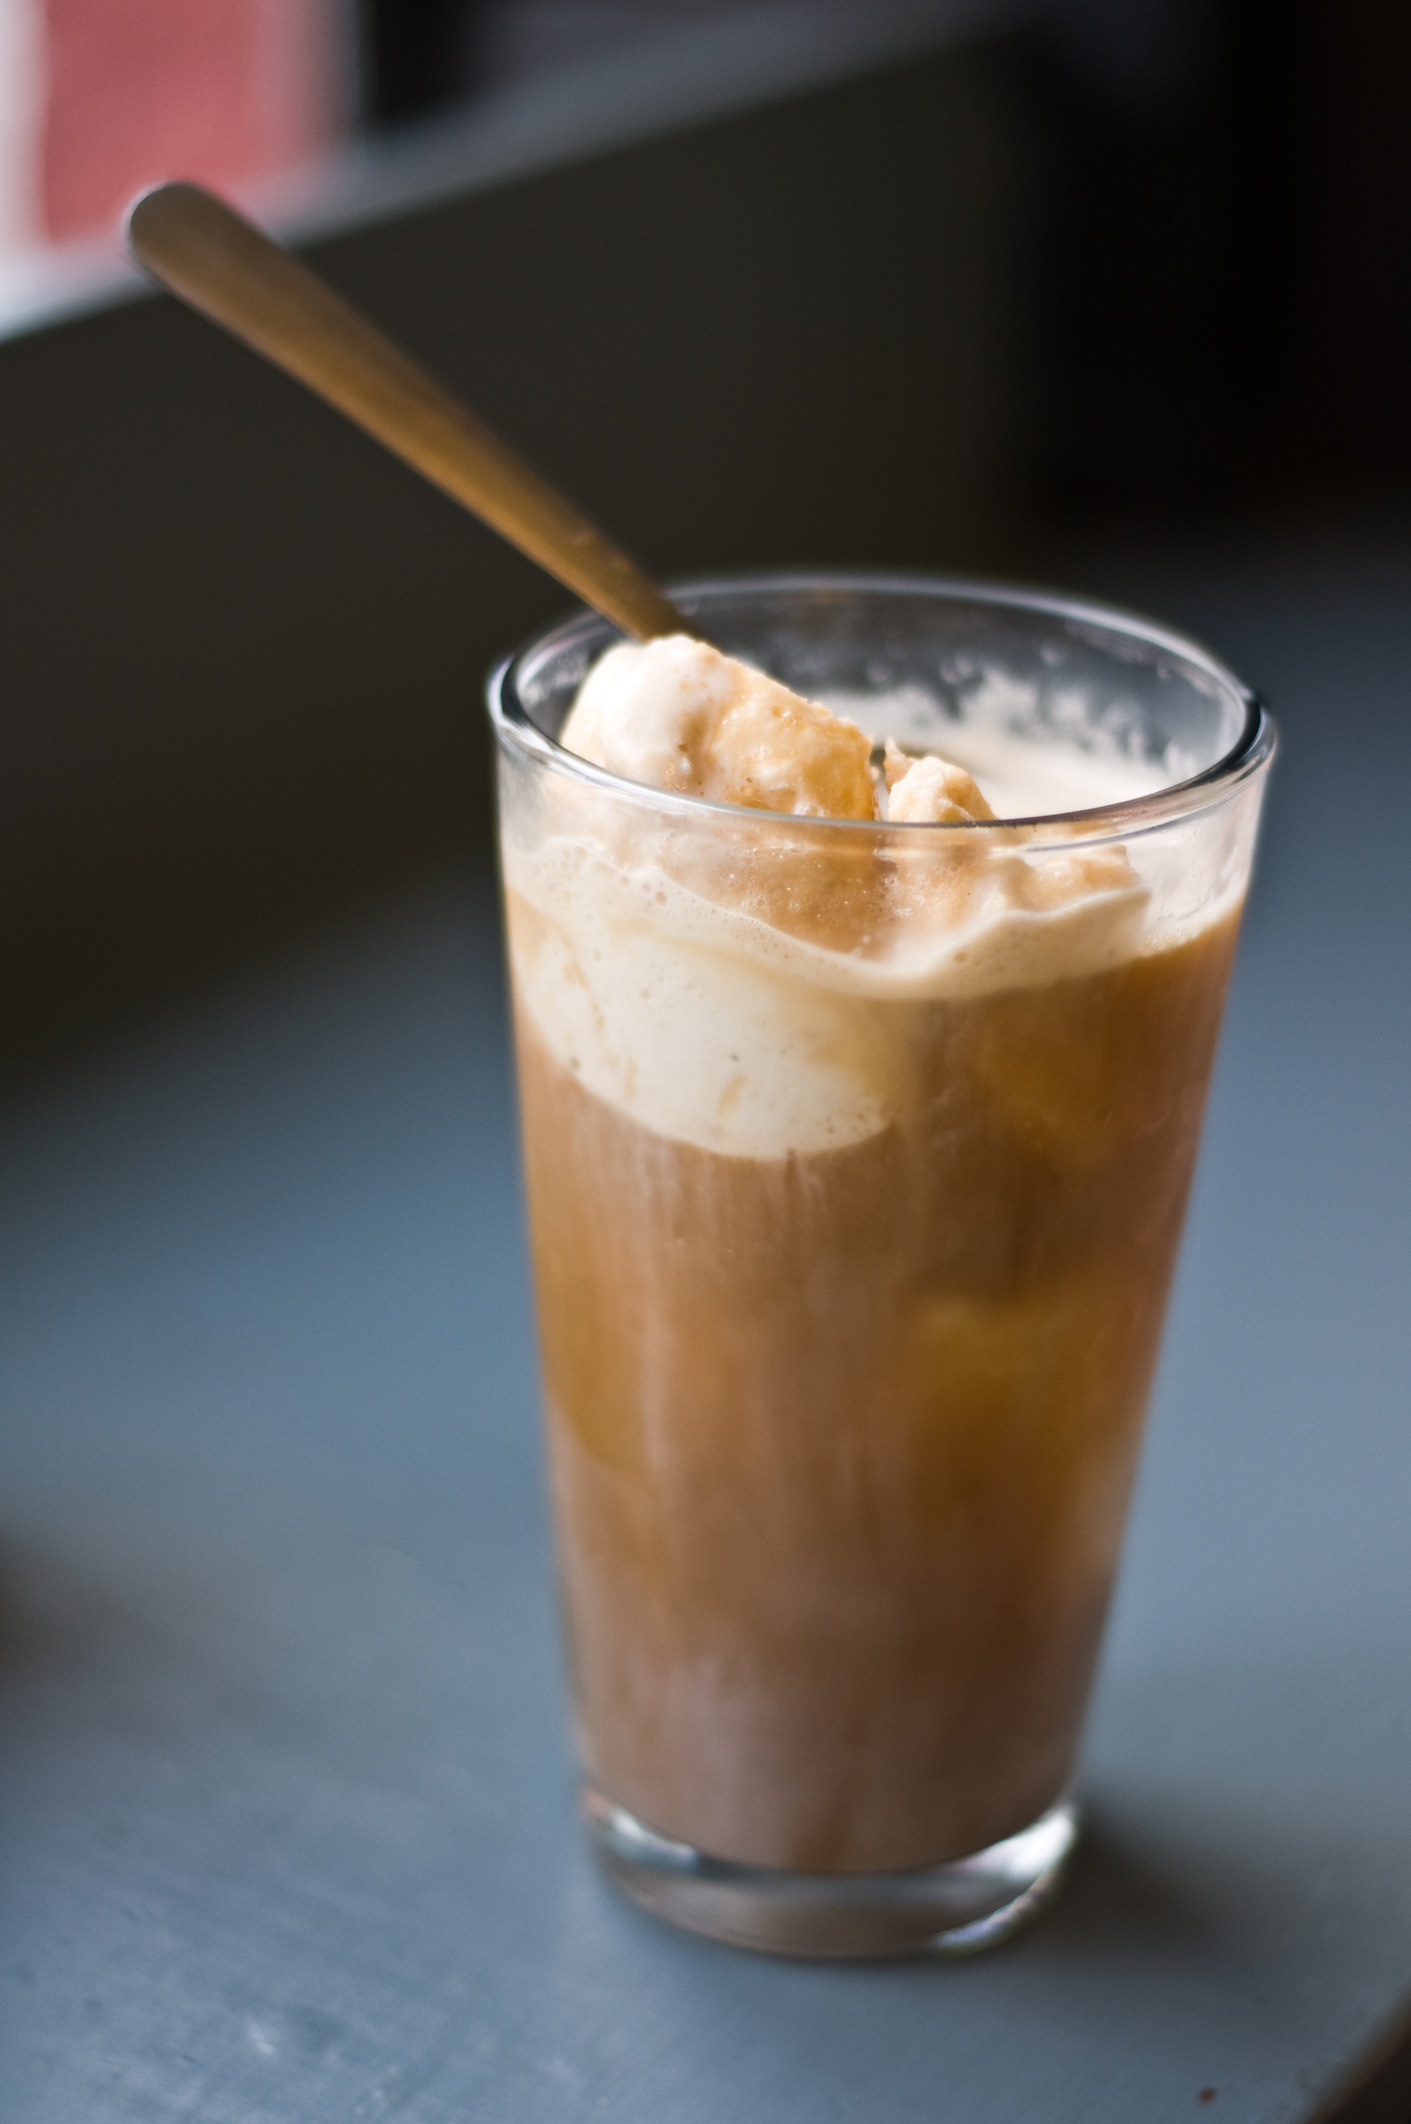 A root beer float